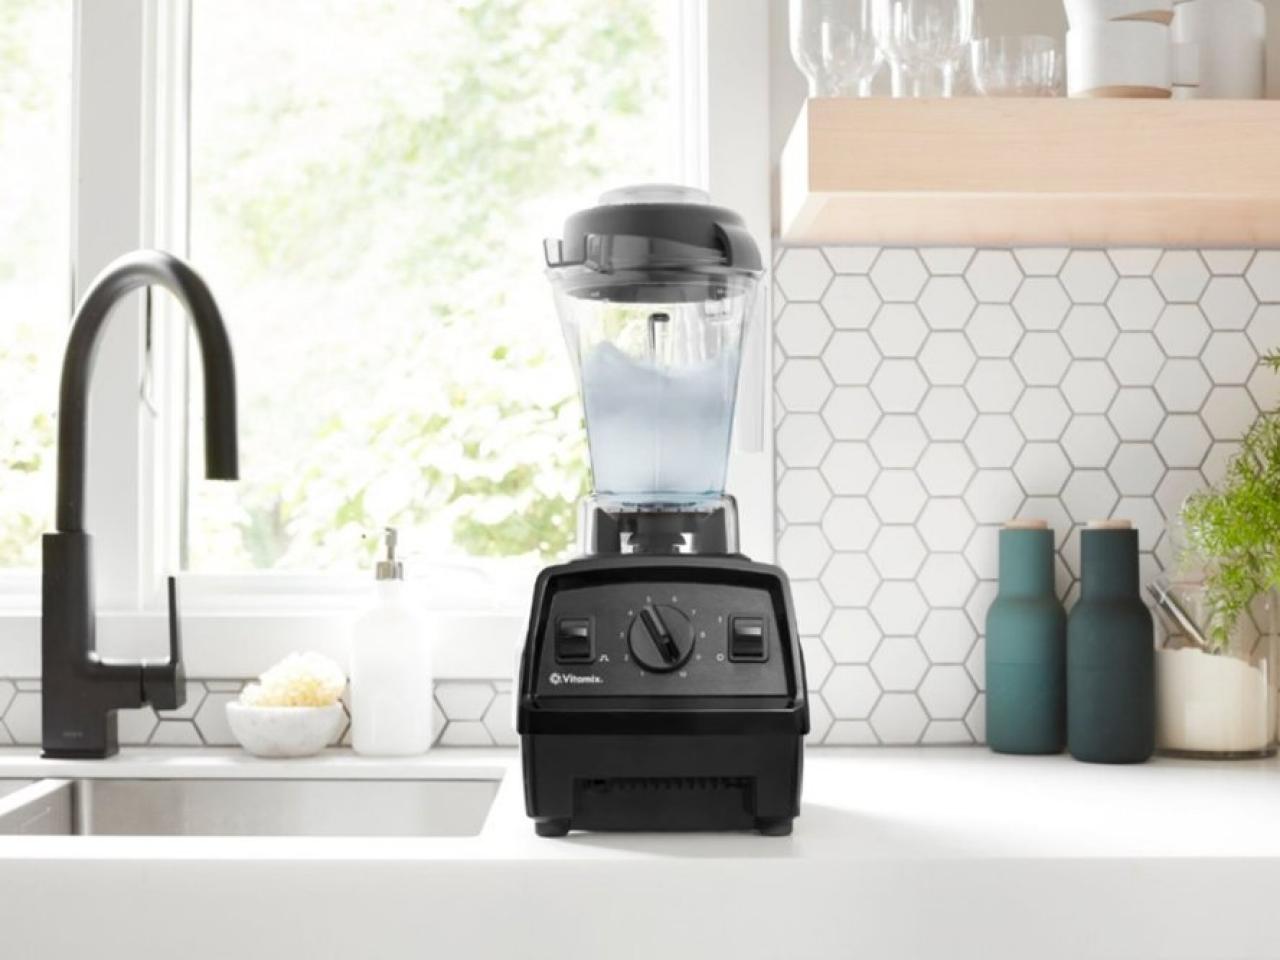 Shop now to save 45% on Vitamix blenders for October Prime Day